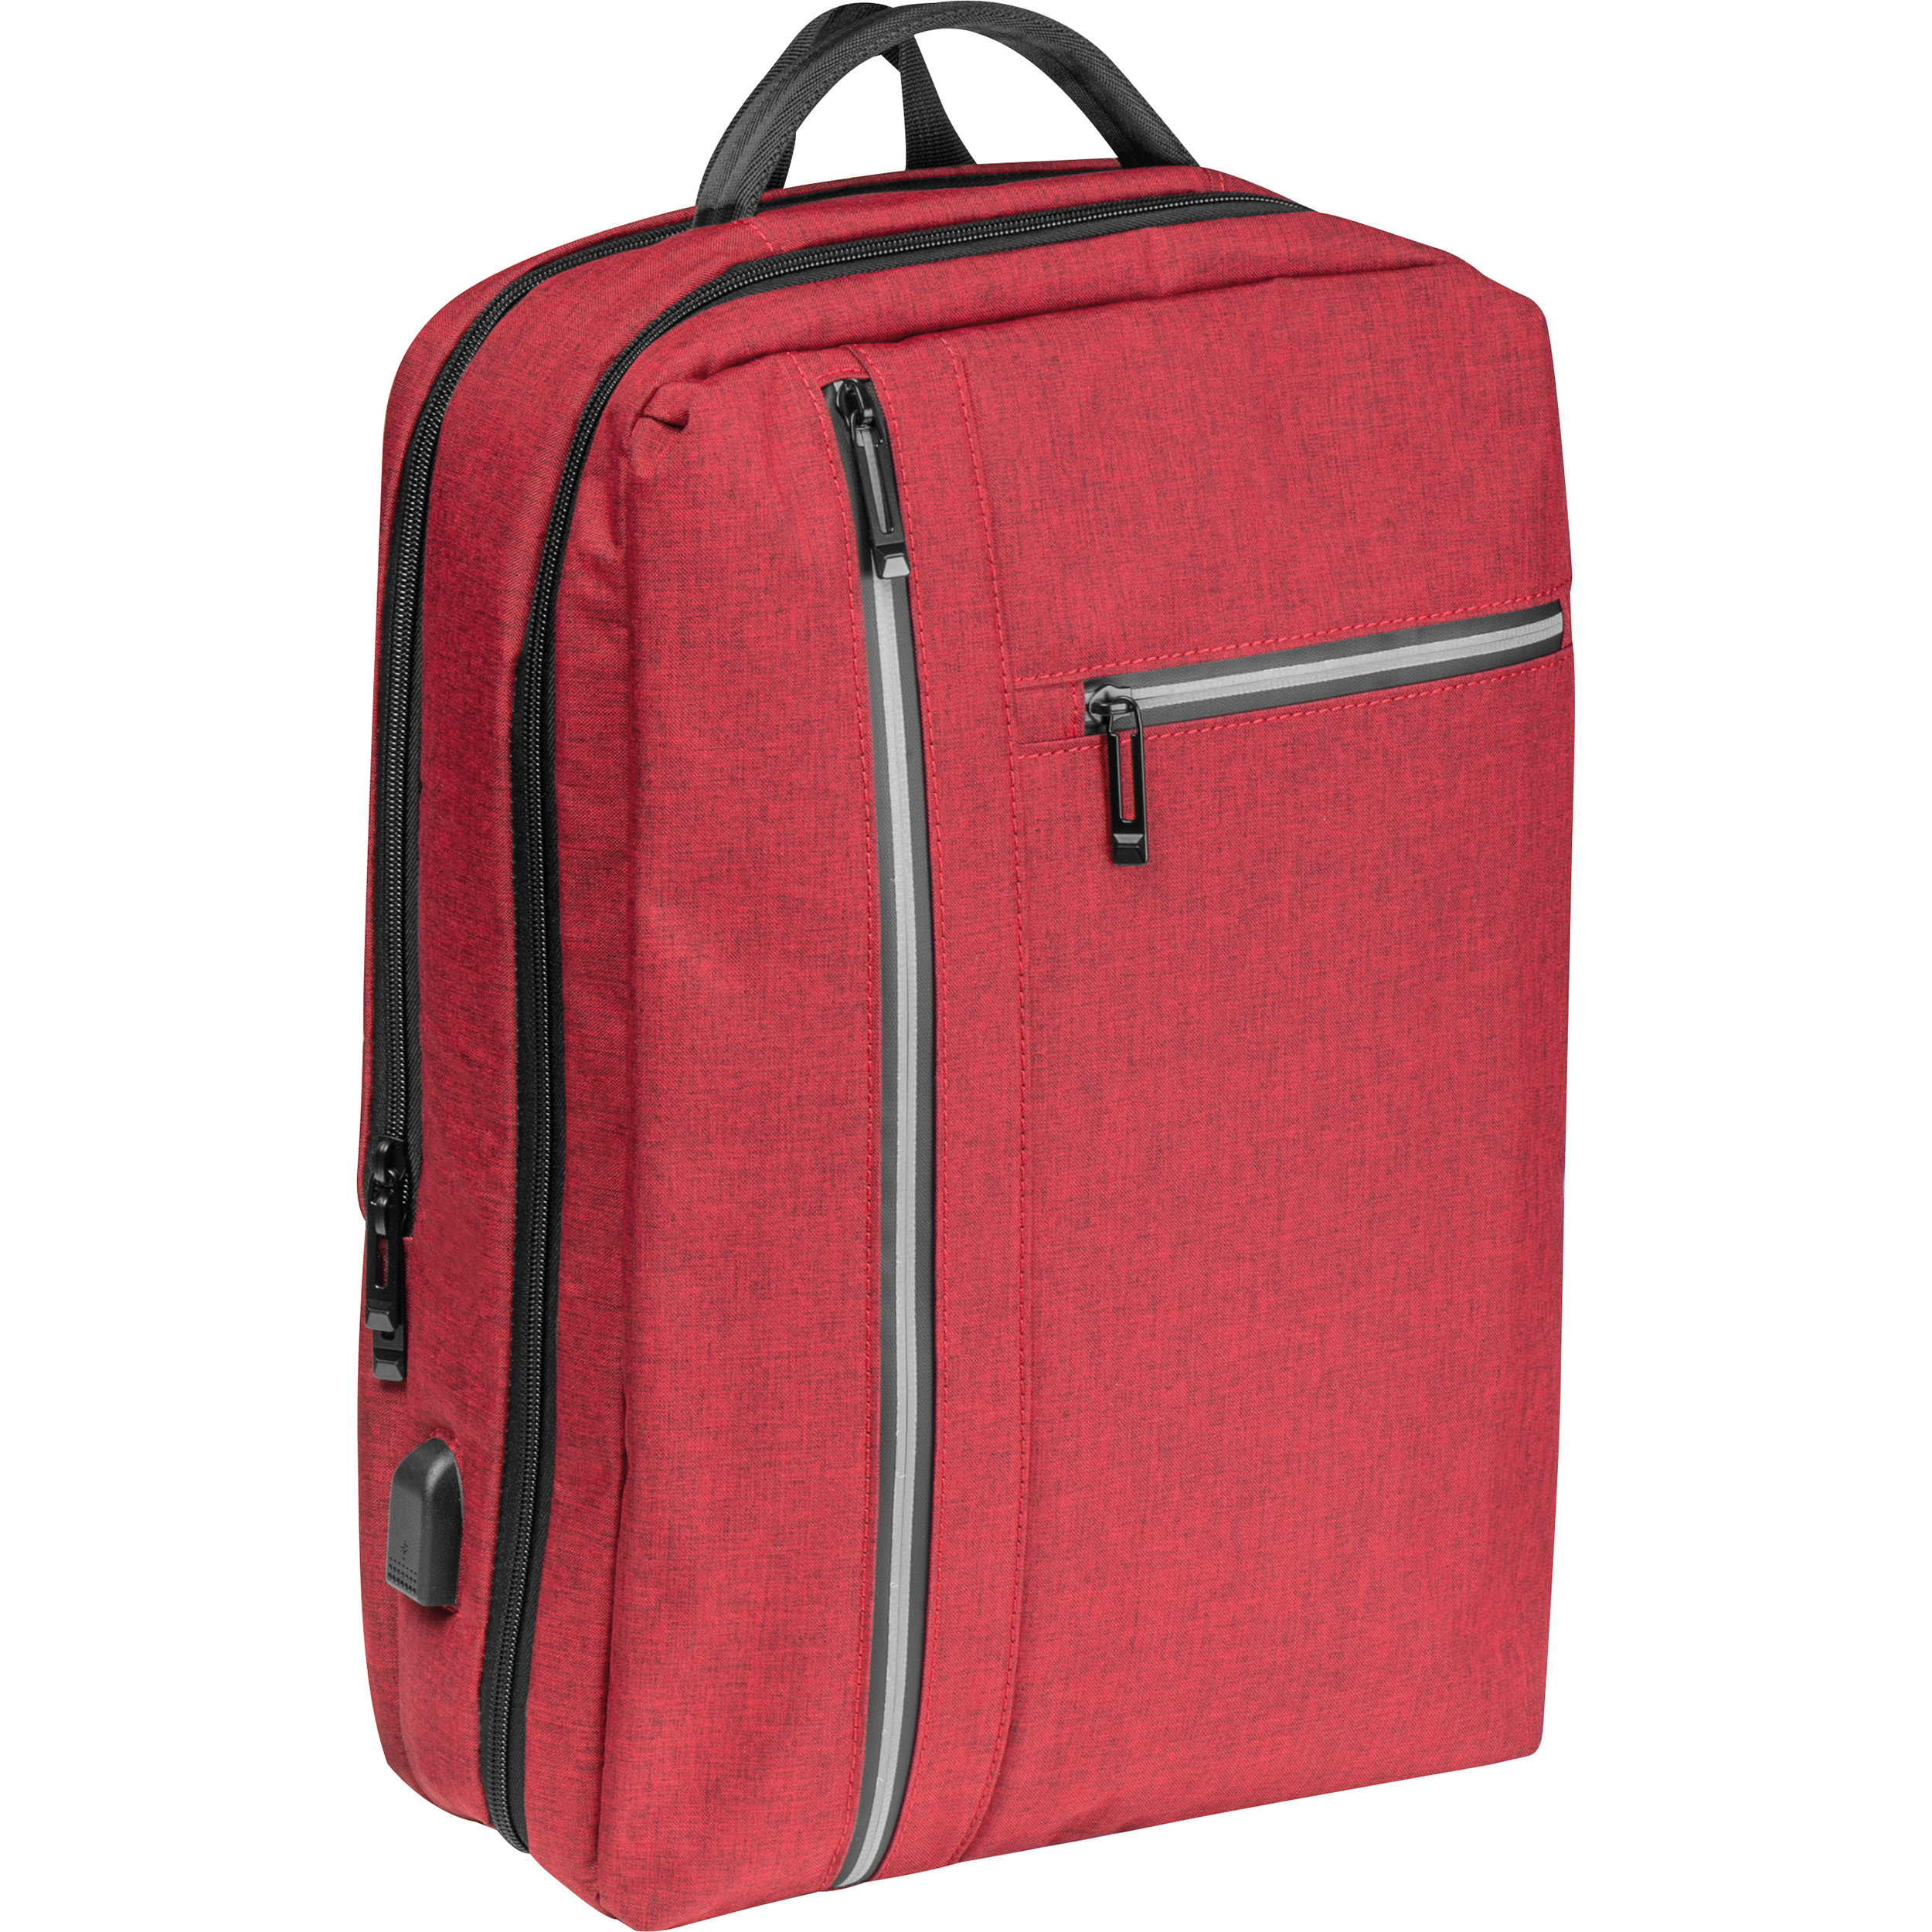 NylonTech Backpack - Wycoller - East Grinstead